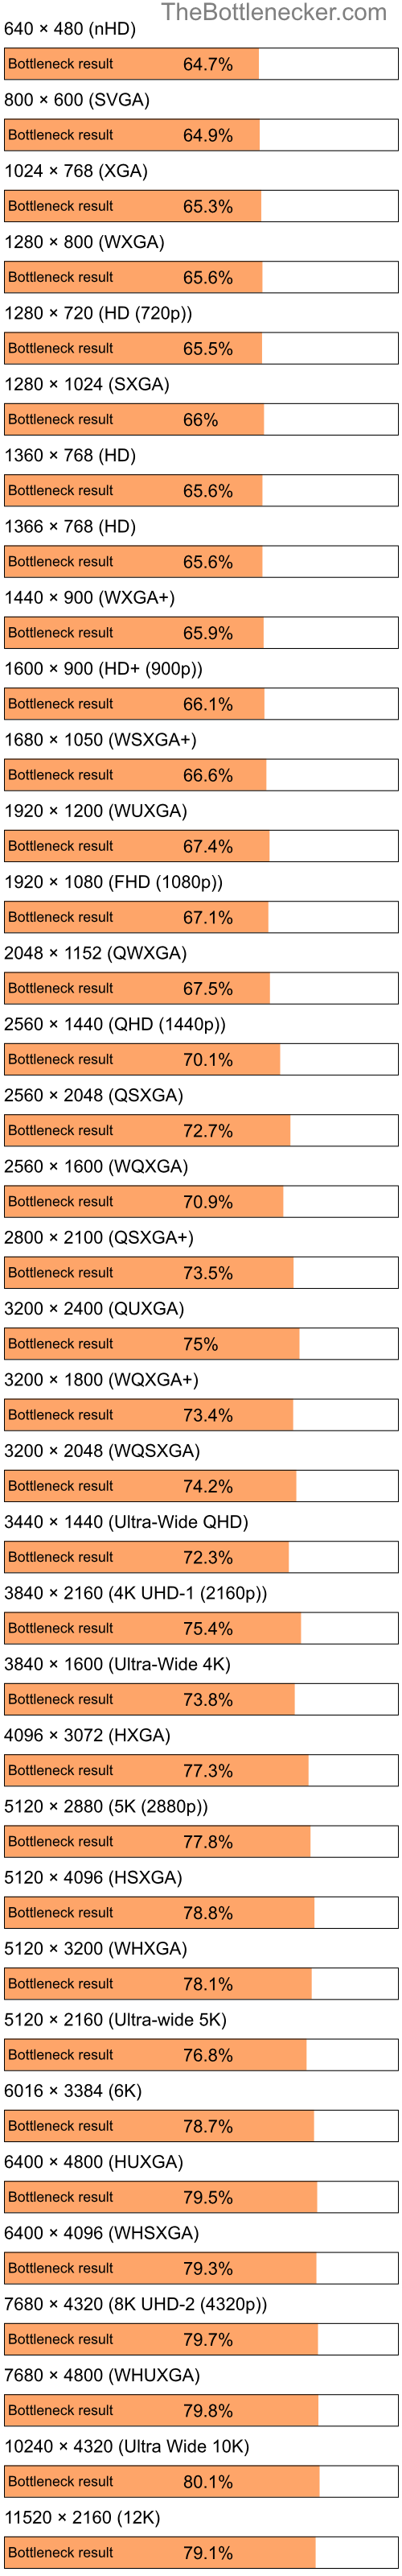 Bottleneck results by resolution for Intel Atom N270 and AMD Mobility Radeon HD 3430 in7 Days to Die